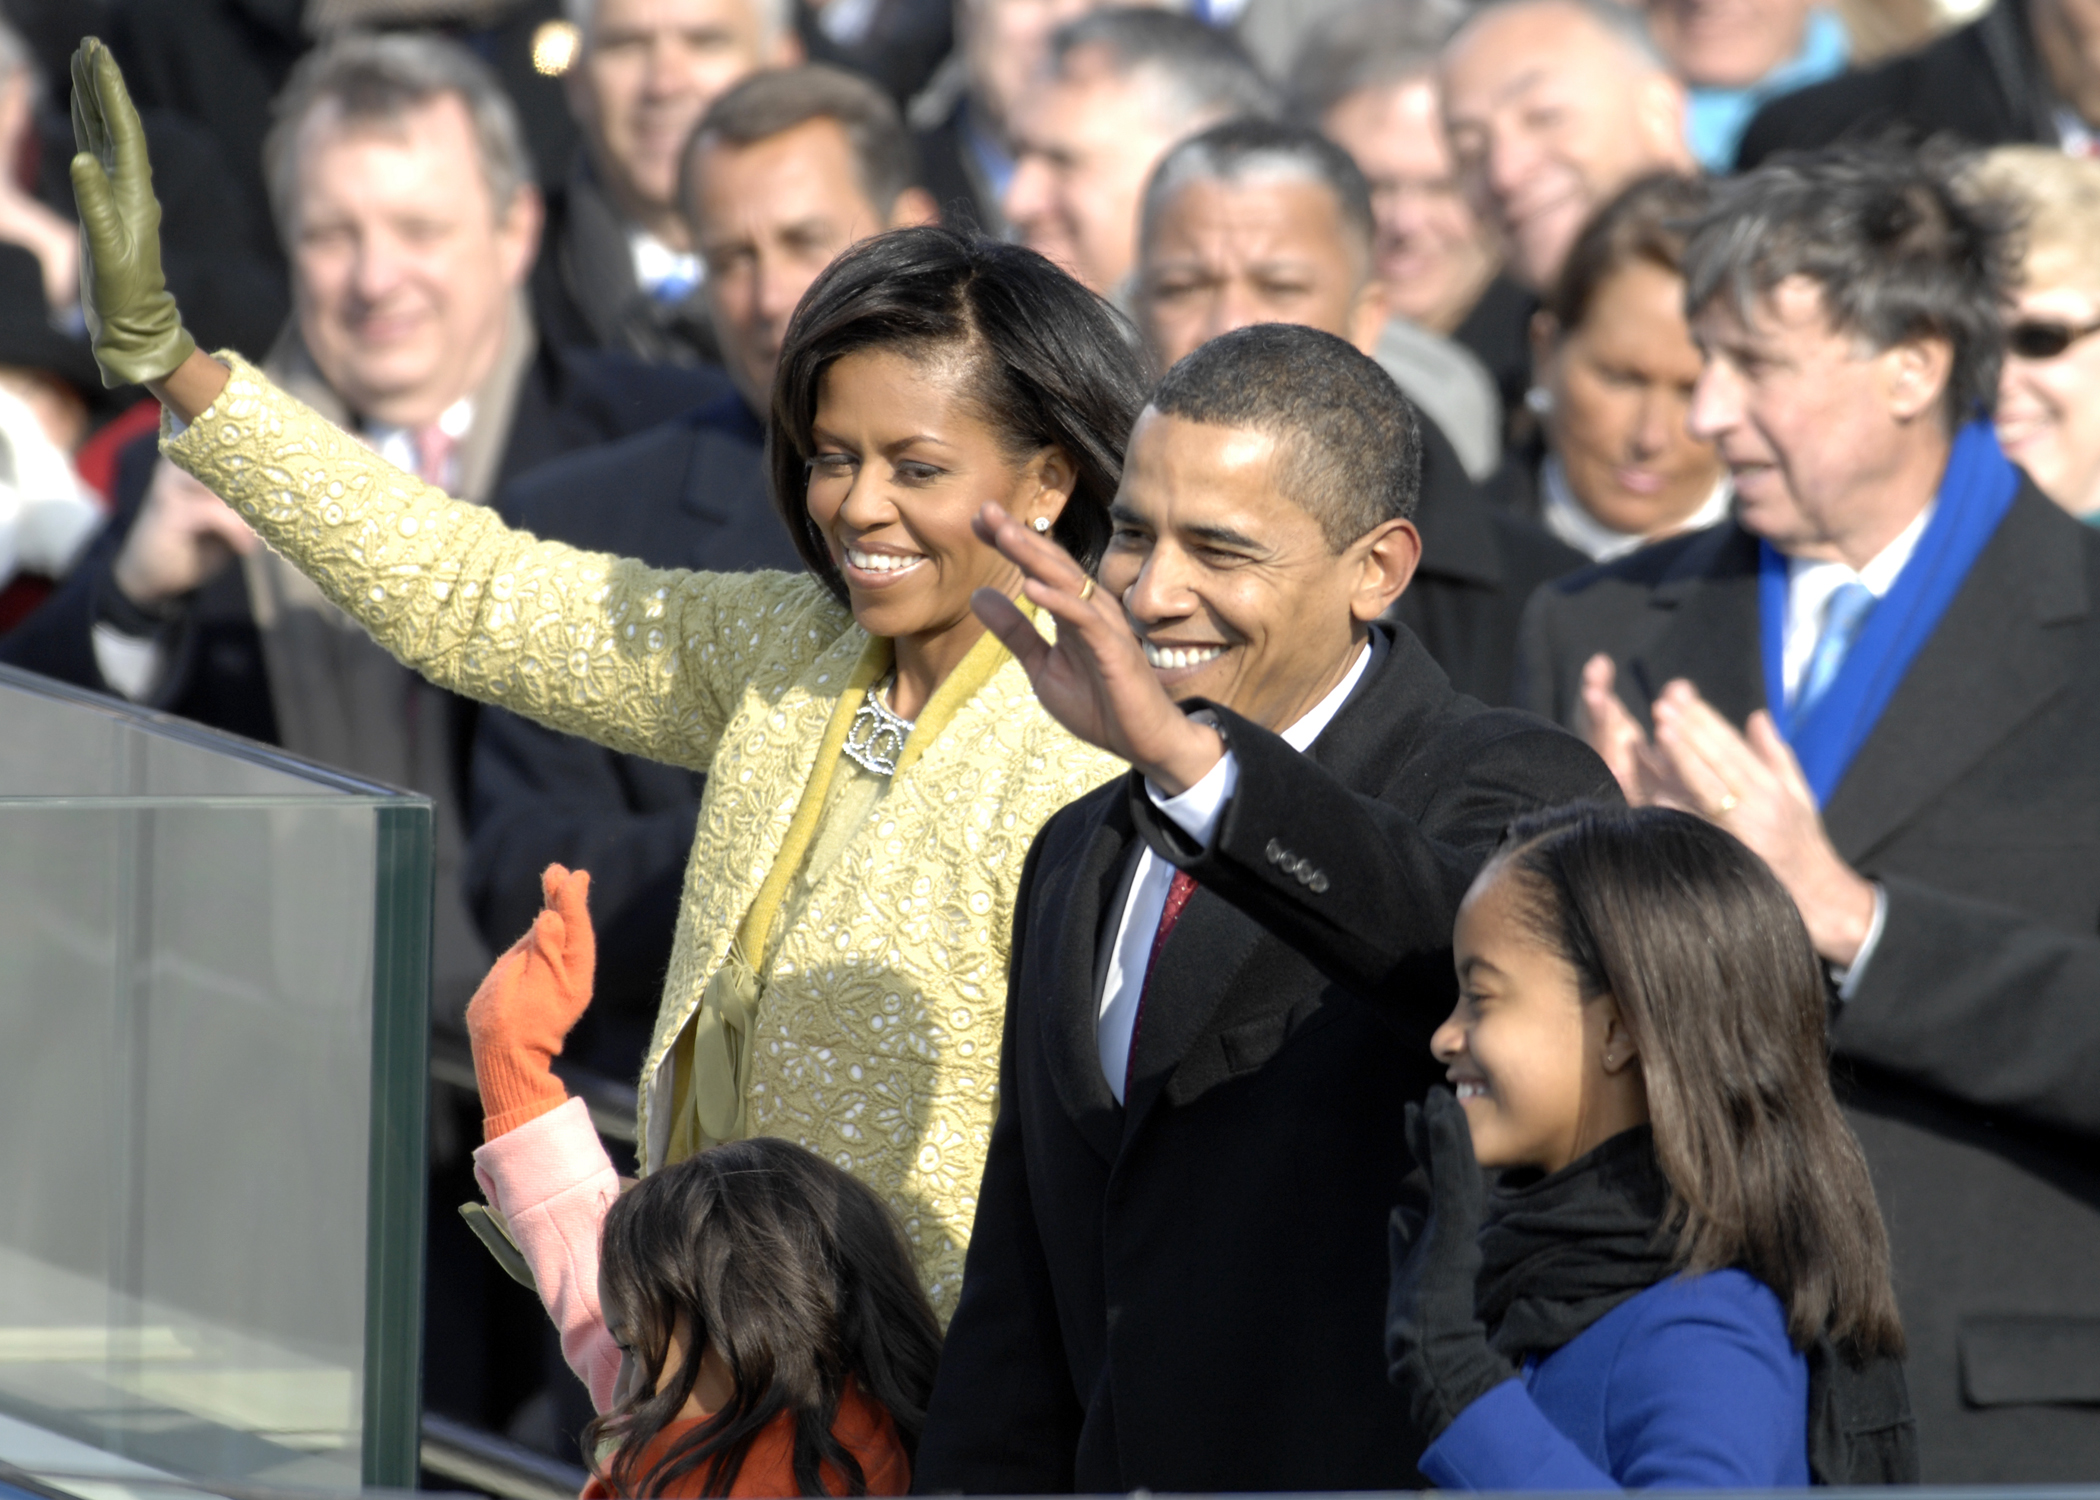 photo of President Obama, First Lady Michelle Obama, and their daughters waving to a crowd